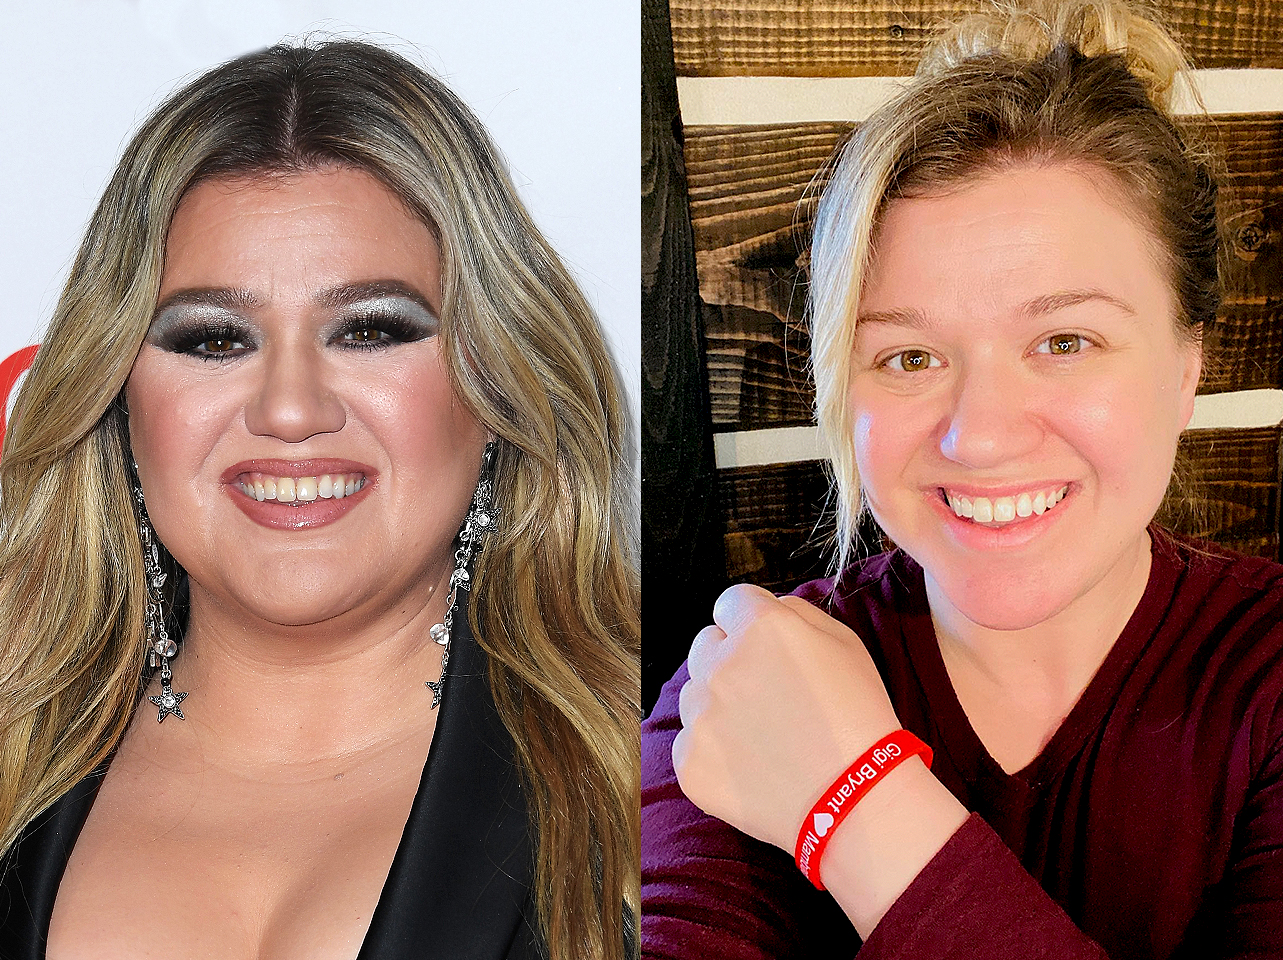 Kelly Clarkson with makeup vs without makeup | Source: Getty Images | Instagram/kellyclarkson